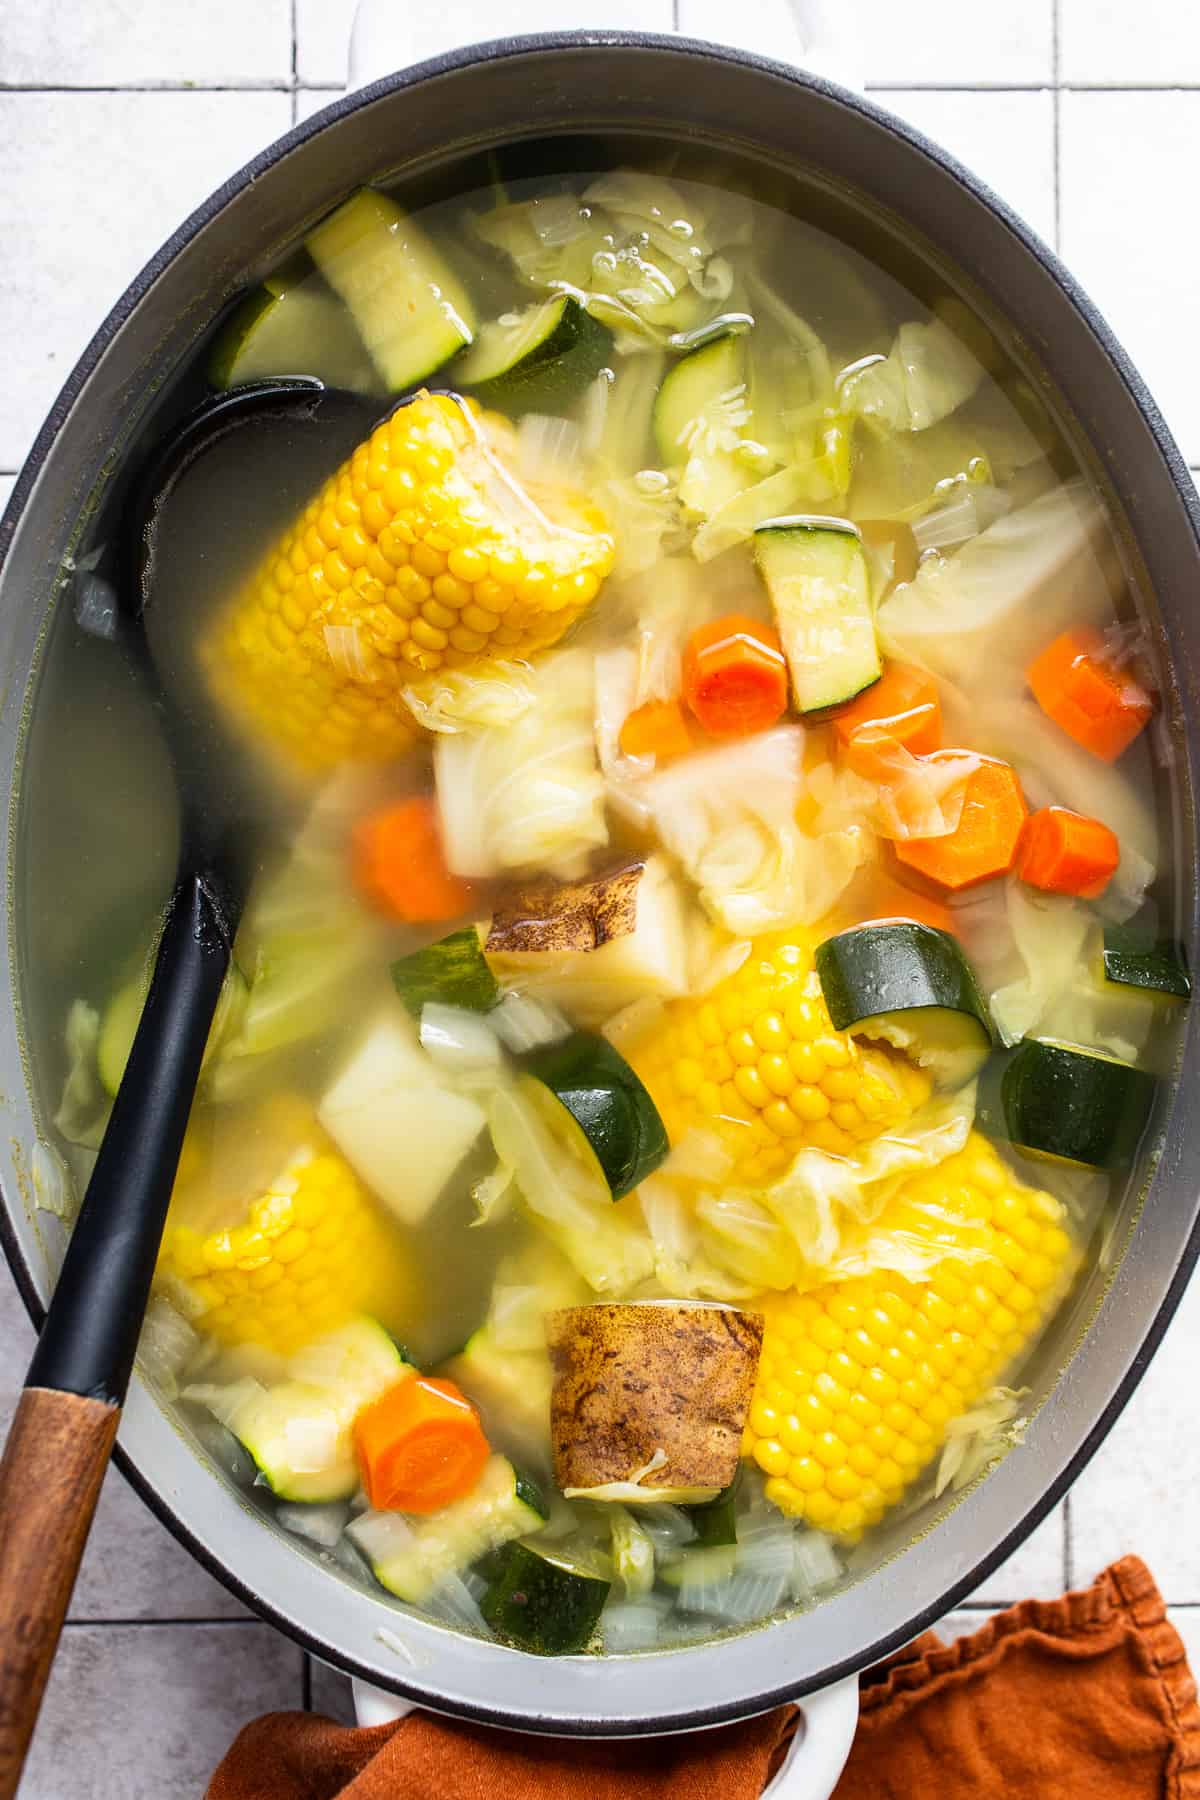 Caldo de pollo in a large pot filled with corn, cabbage, chicken, potatoes, zucchini, and more.